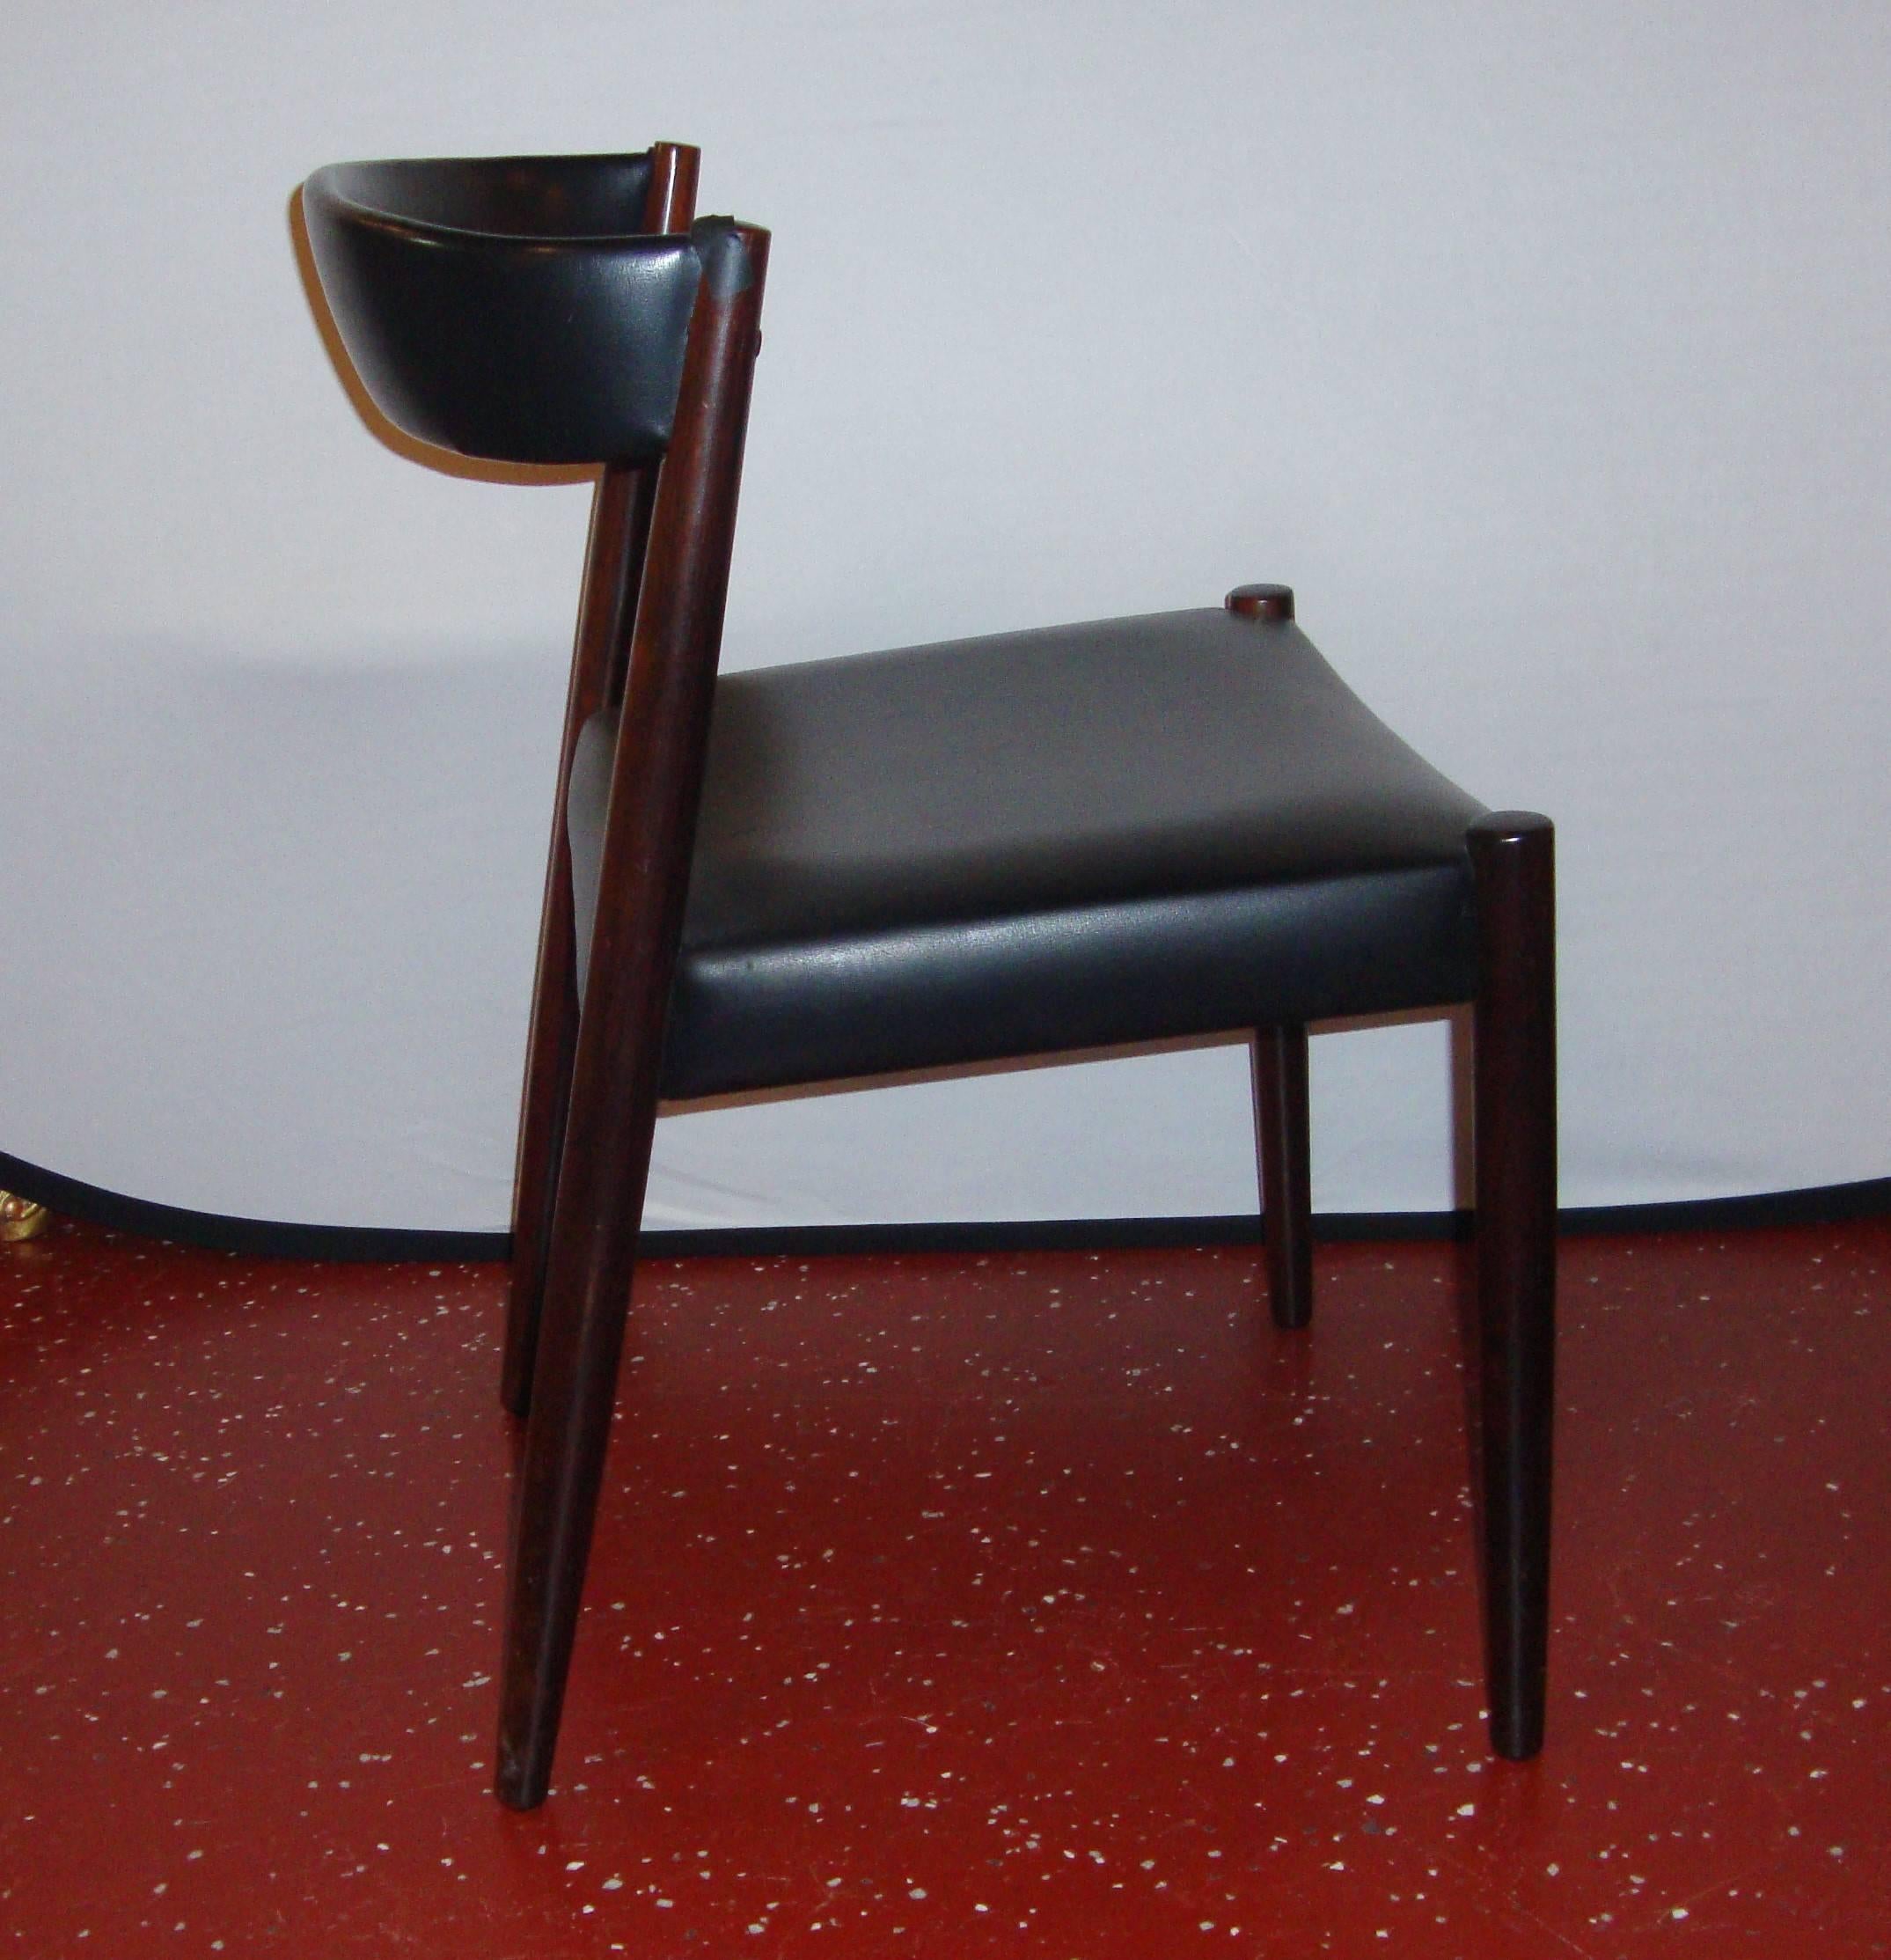 A pair of custom quality Danish modern side chairs. The black leather seats and curved backrests make for comfort and look wonderful on these very sleek and stylish side or office chairs. The wood frames having been recently polished and waxed.